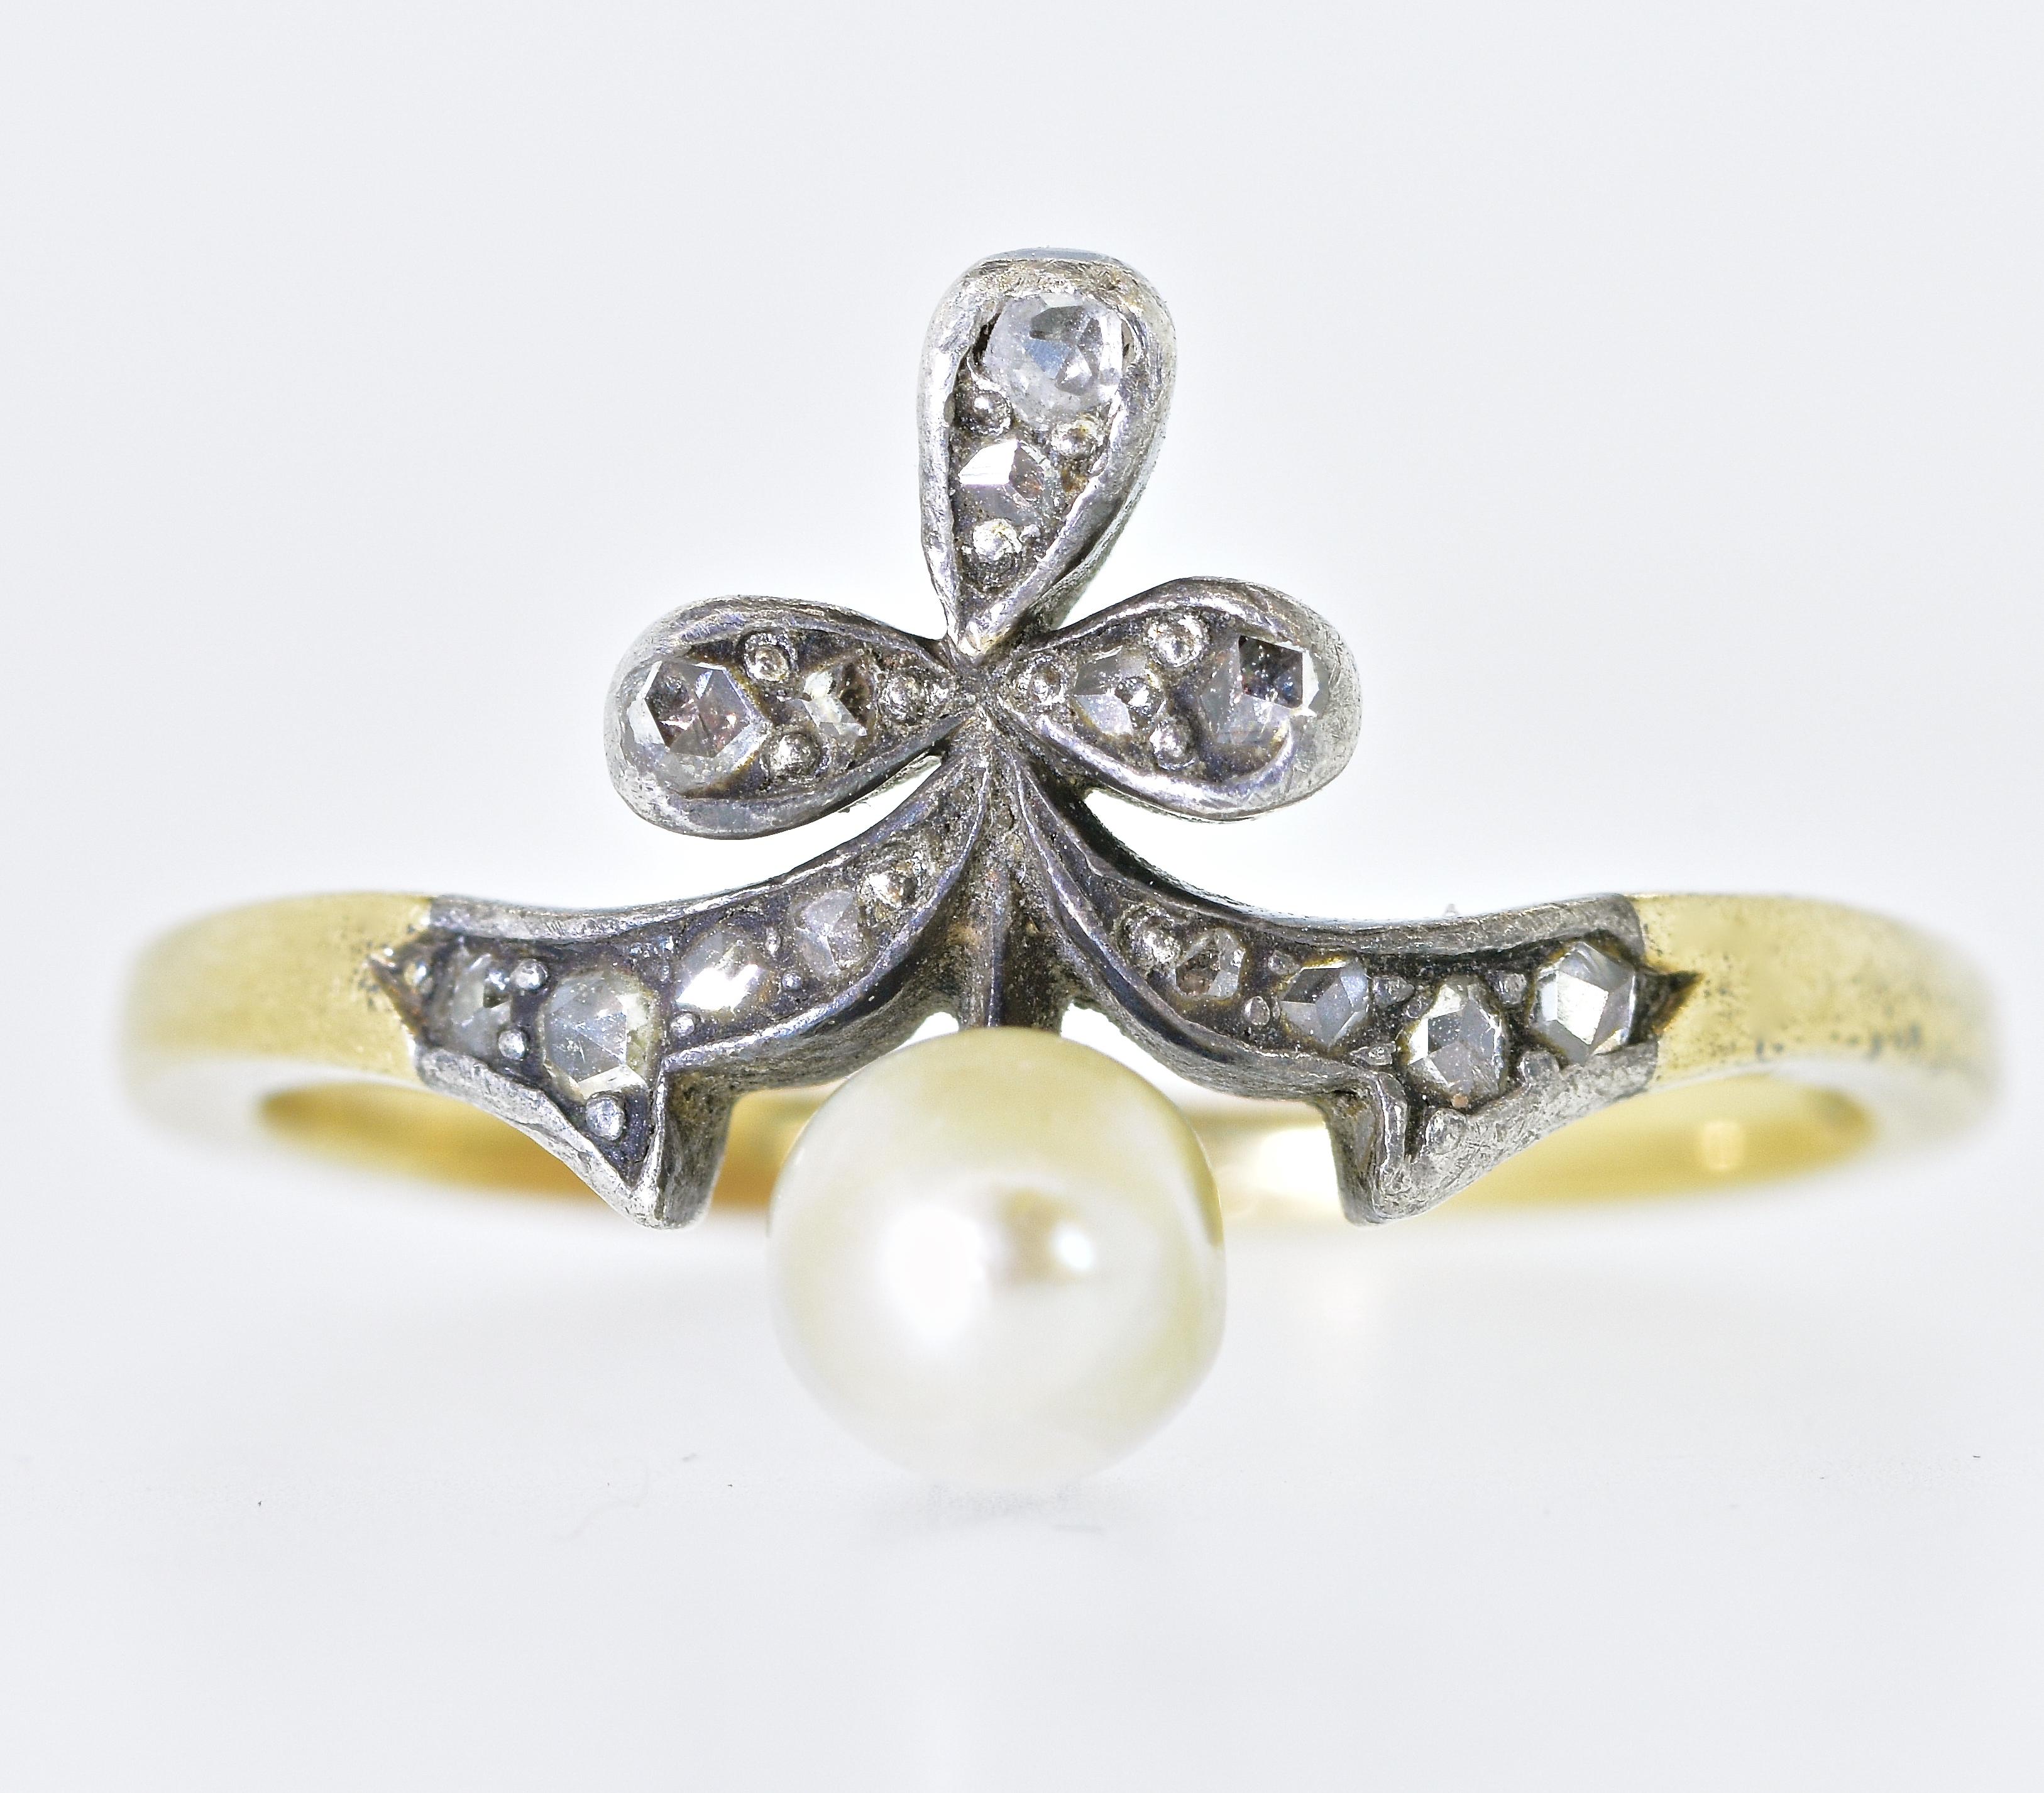 The pearl measures 4.83 mm., and is probably natural as opposed to cultured.  It is accented with rose cut diamonds set in silver.  This gold and silver ring dates to the mid 19th century .  In fine condition, this ring is a size 6.75